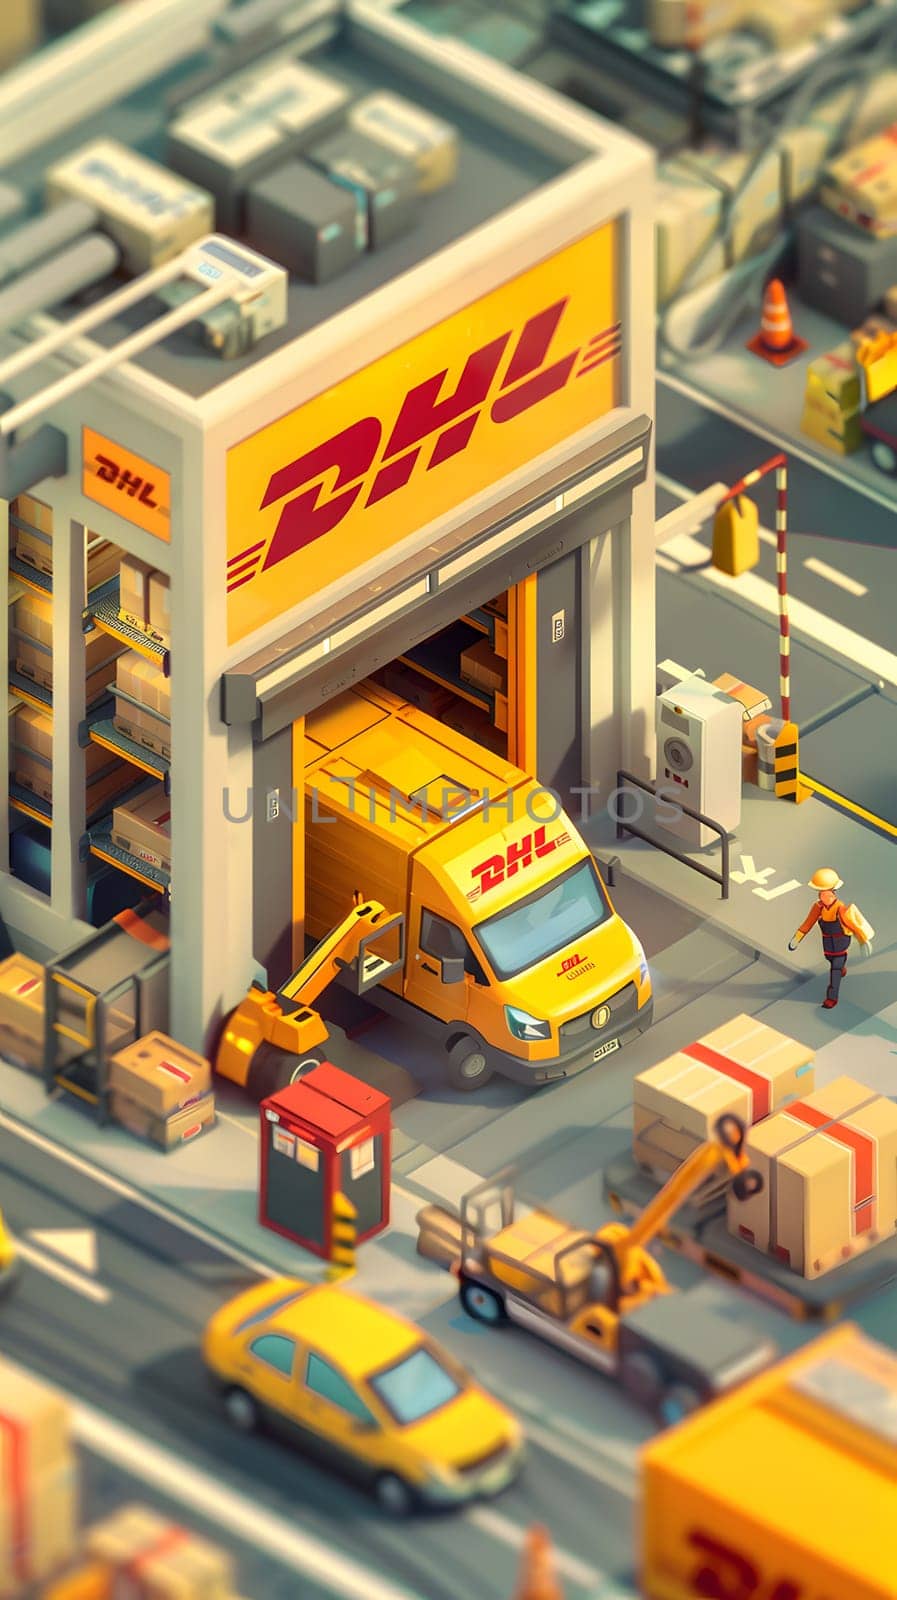 A yellow DHL delivery truck is parked in front of a building on the urban thoroughfare